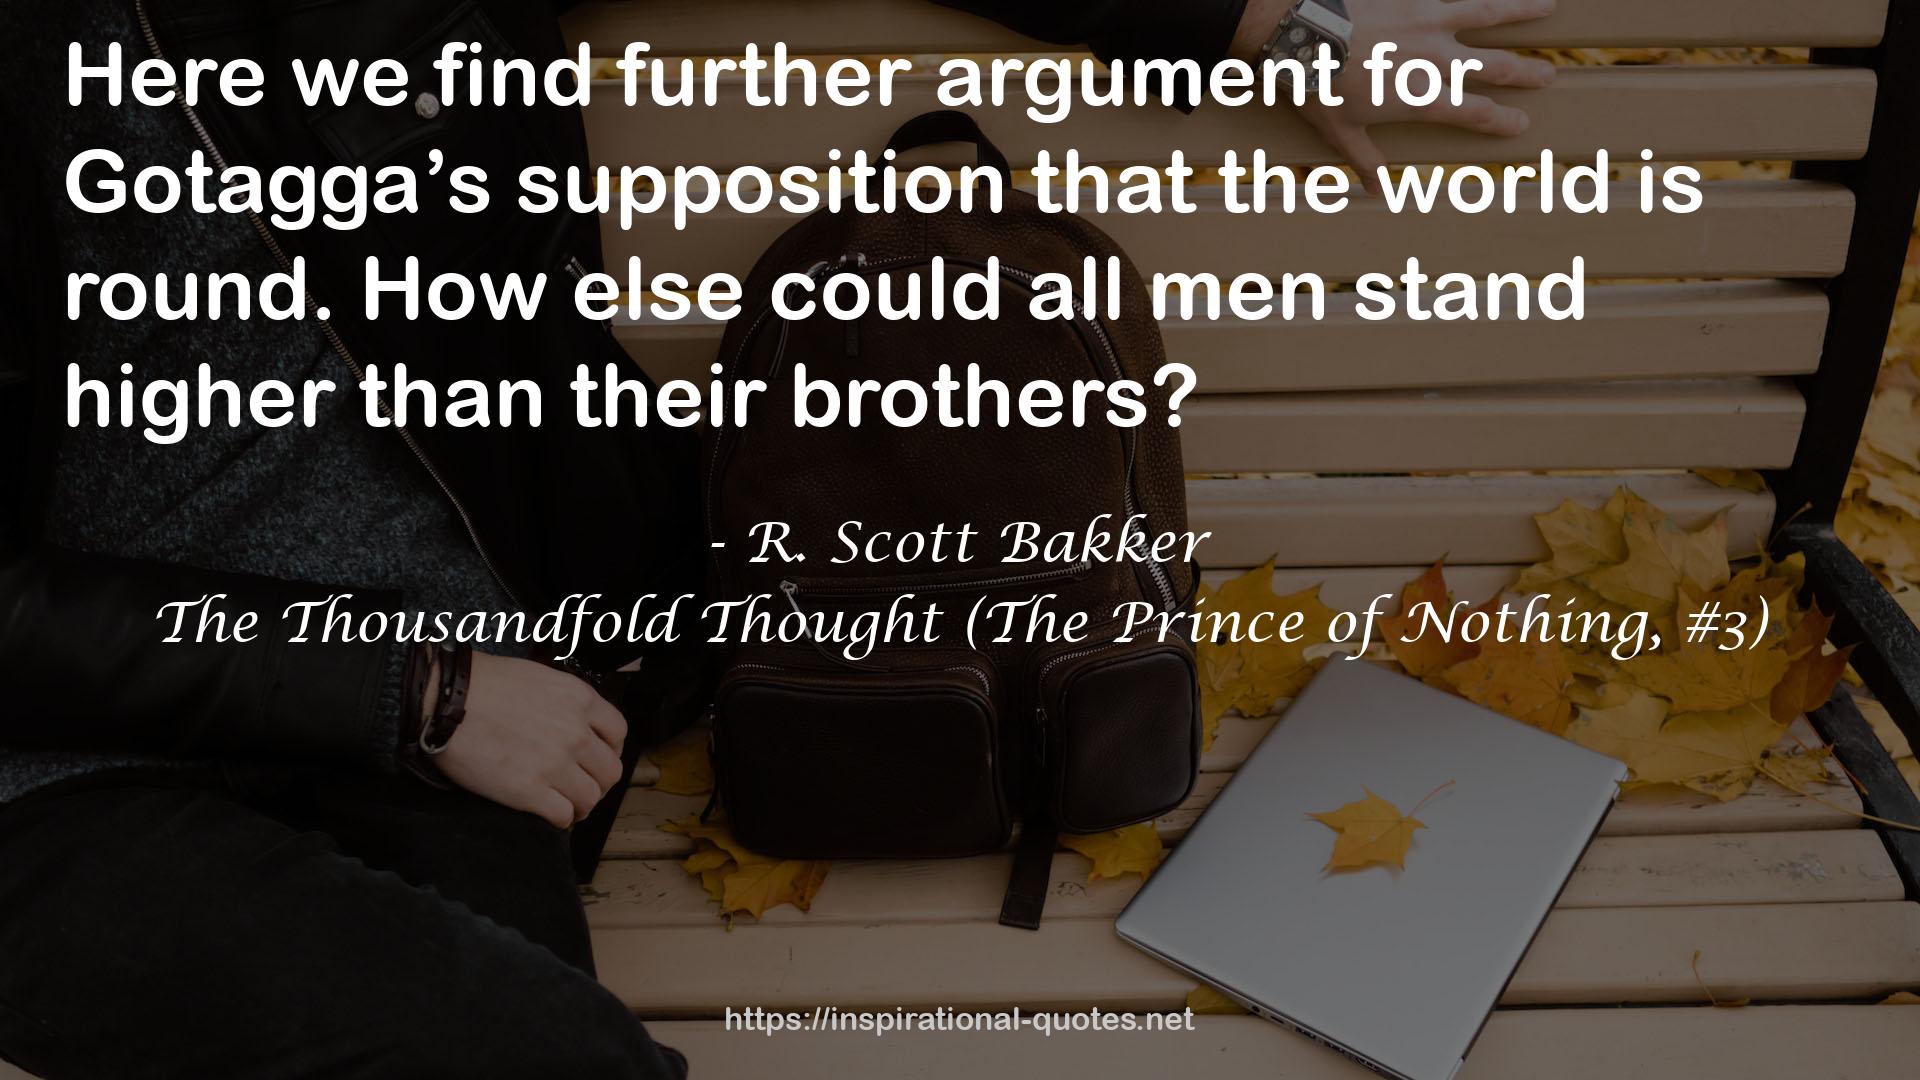 The Thousandfold Thought (The Prince of Nothing, #3) QUOTES